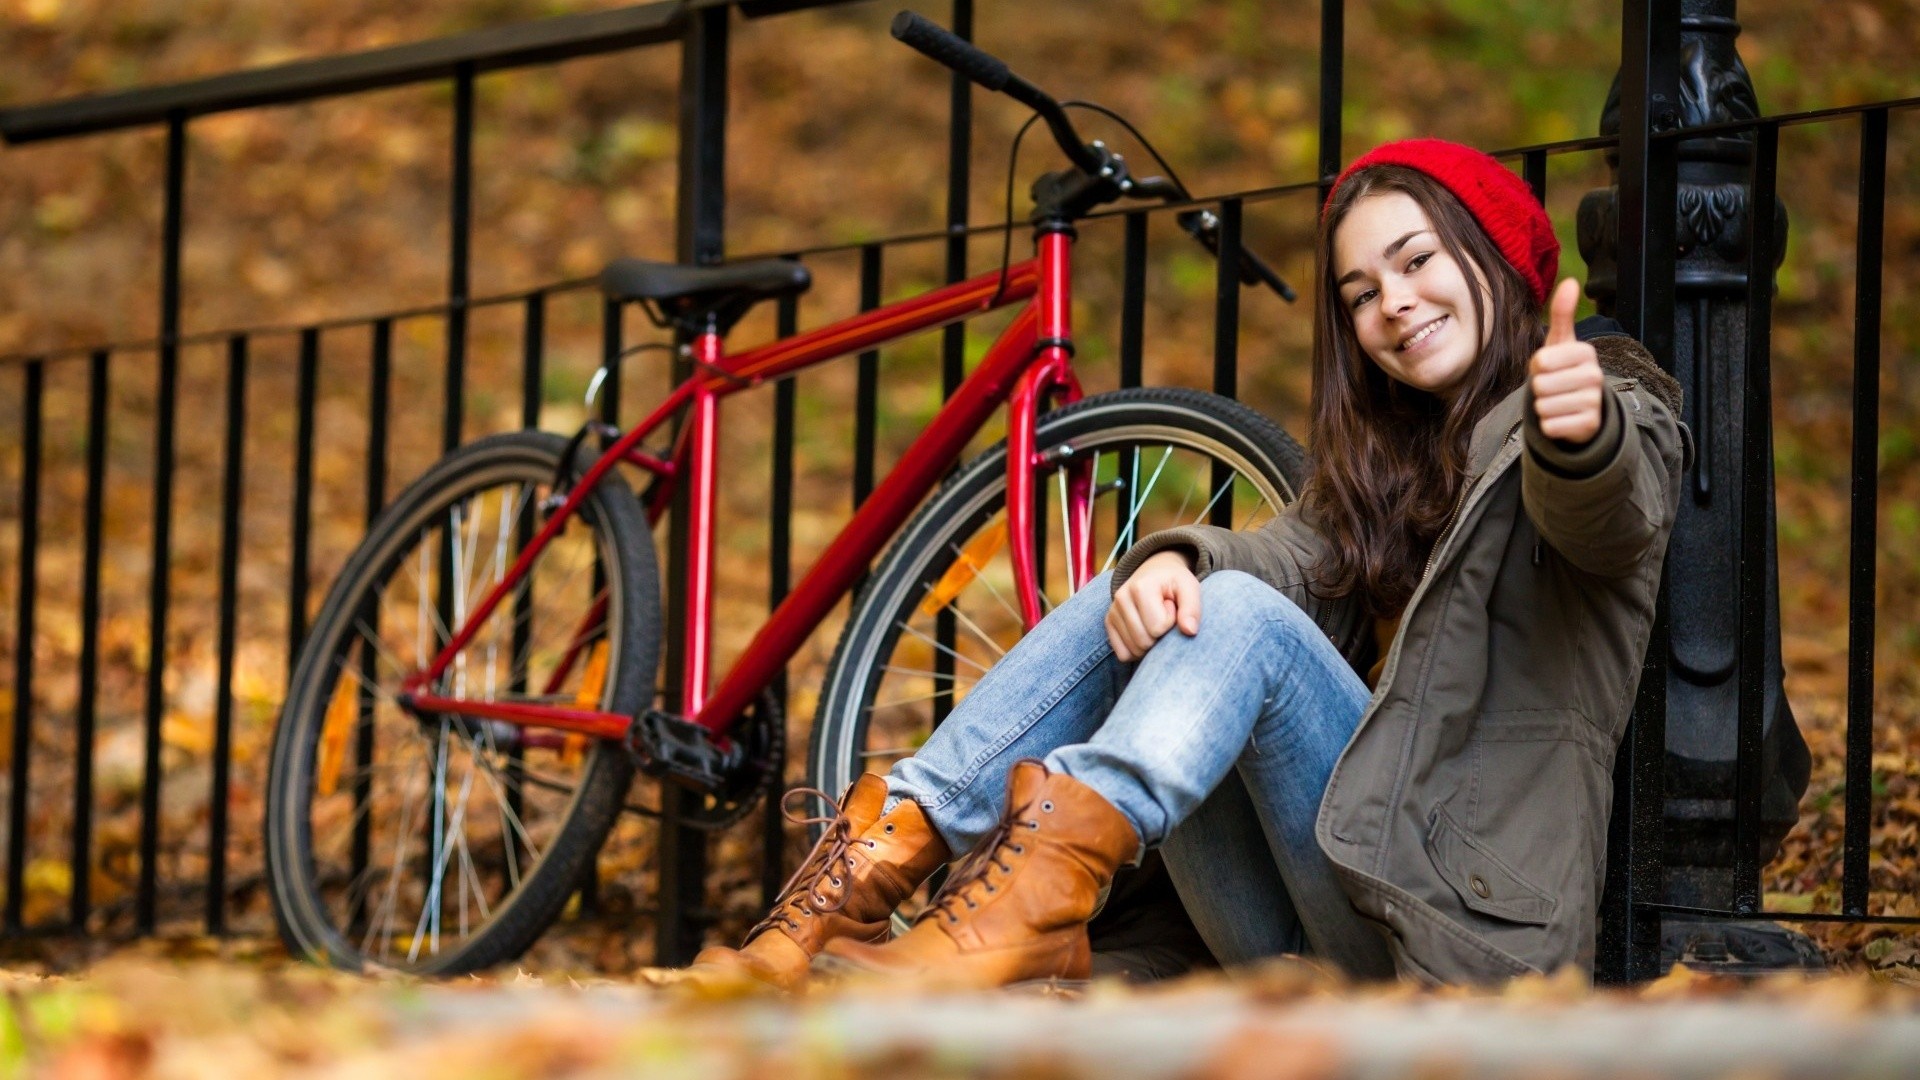 Women Model Brunette Long Hair Women Outdoors Sitting Smiling Jeans Boots Bicycle Fence Fall Leaves  1920x1080